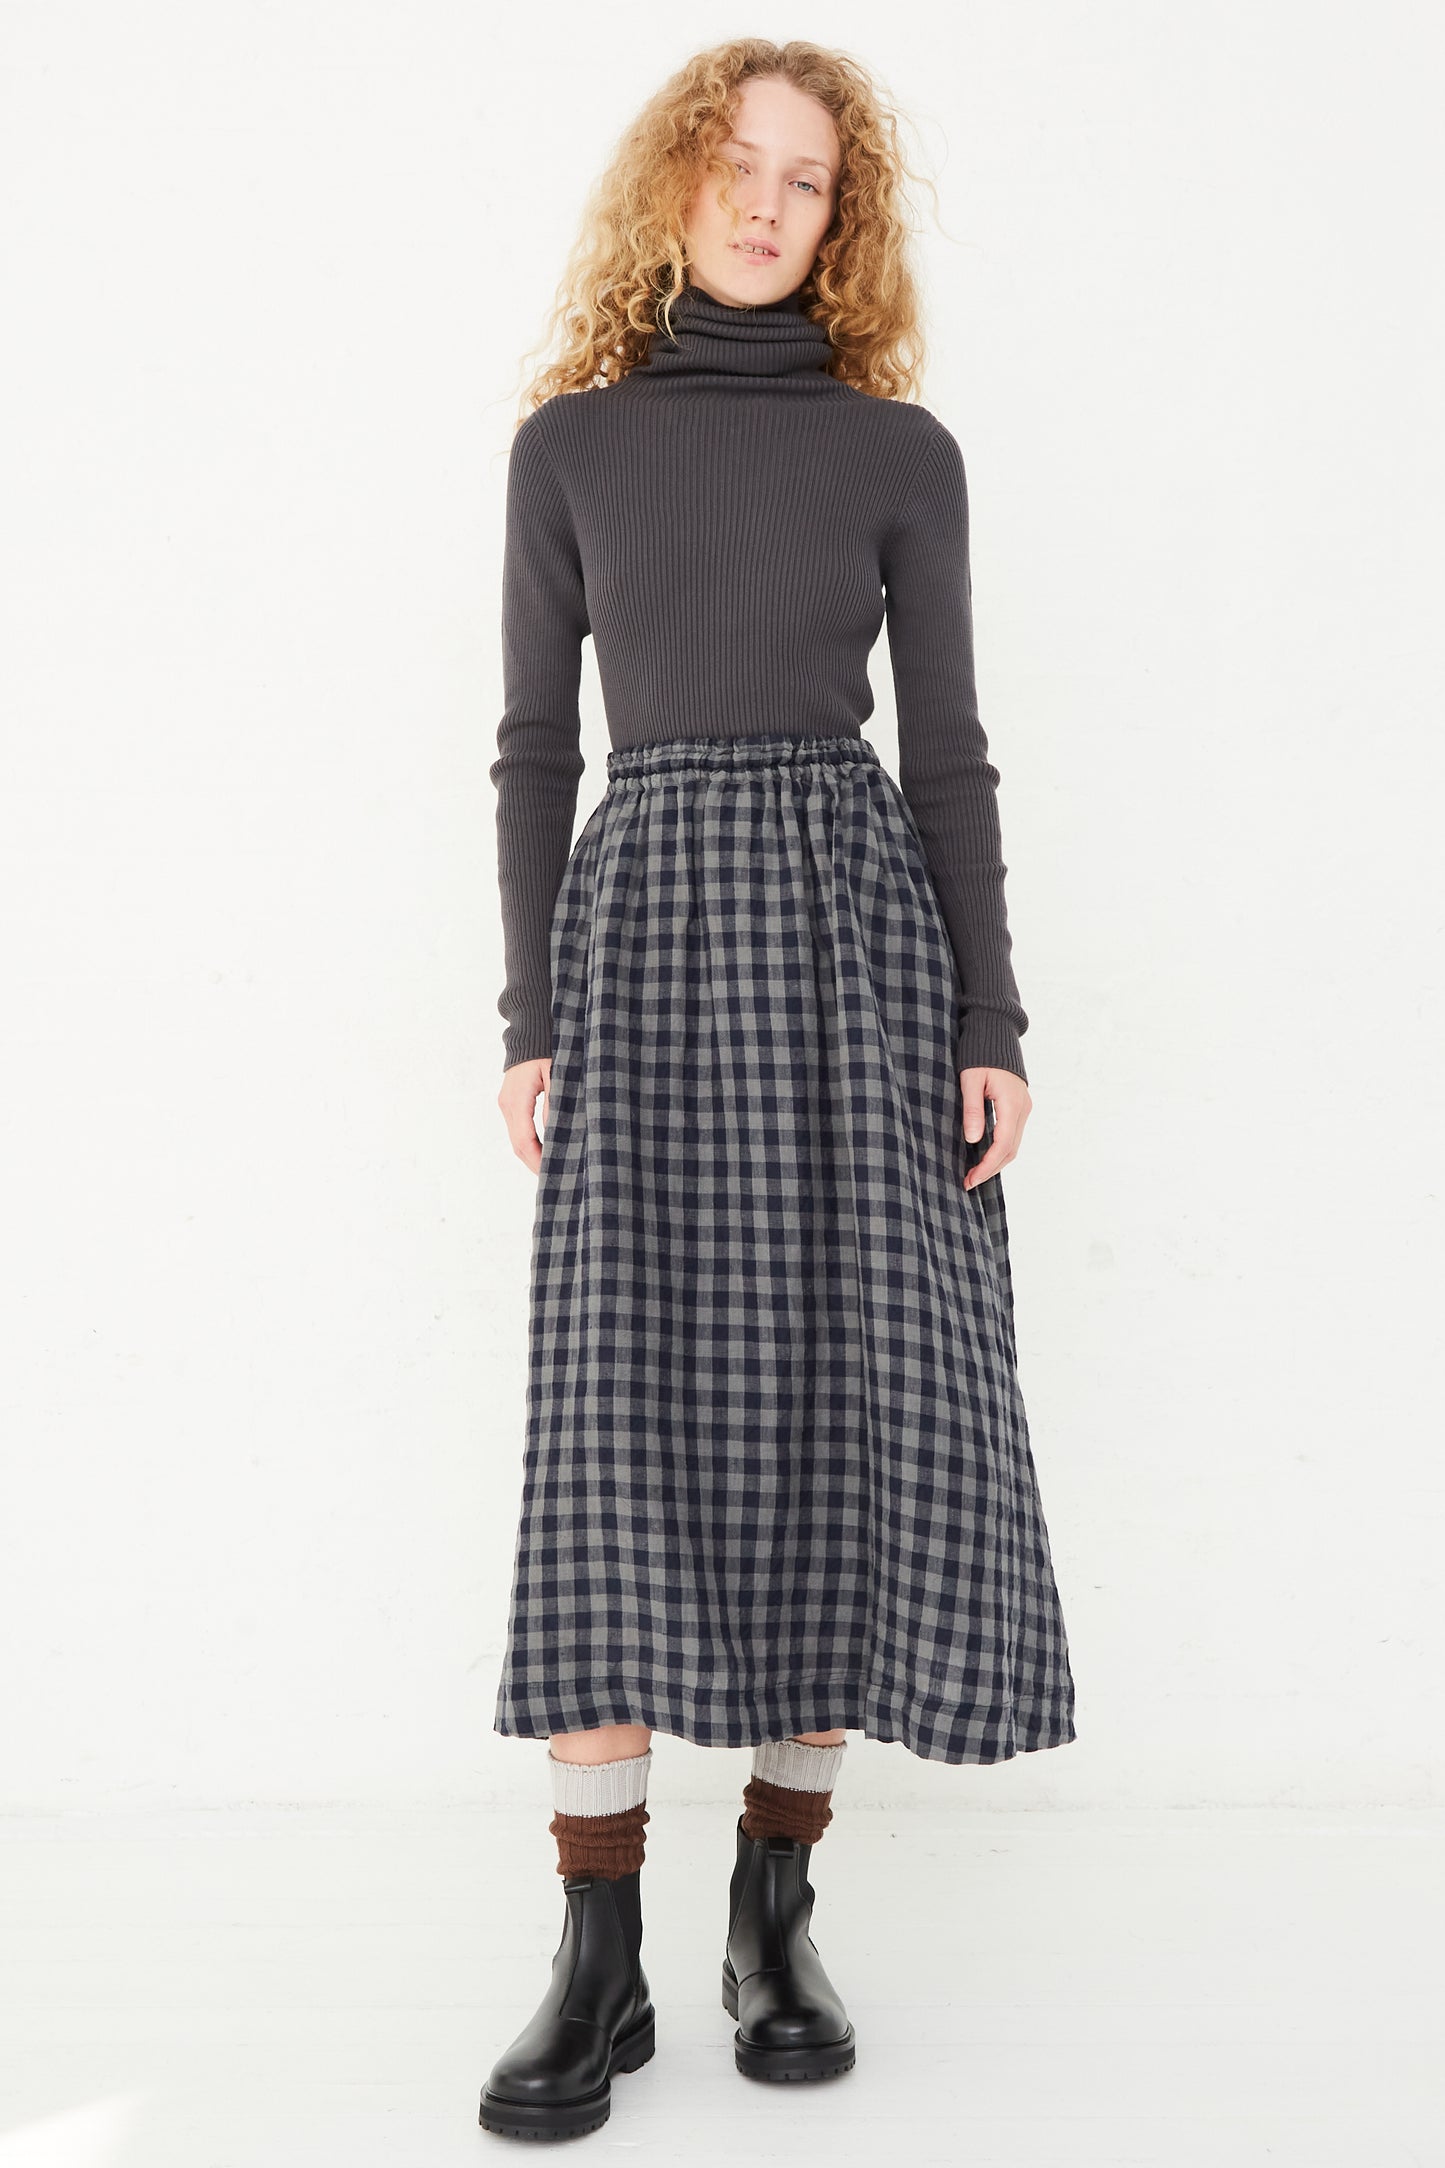 The model is wearing an Azumadaki Linen Gingham Skirt in Charcoal by Ichi Antiquités with an elasticated waist.